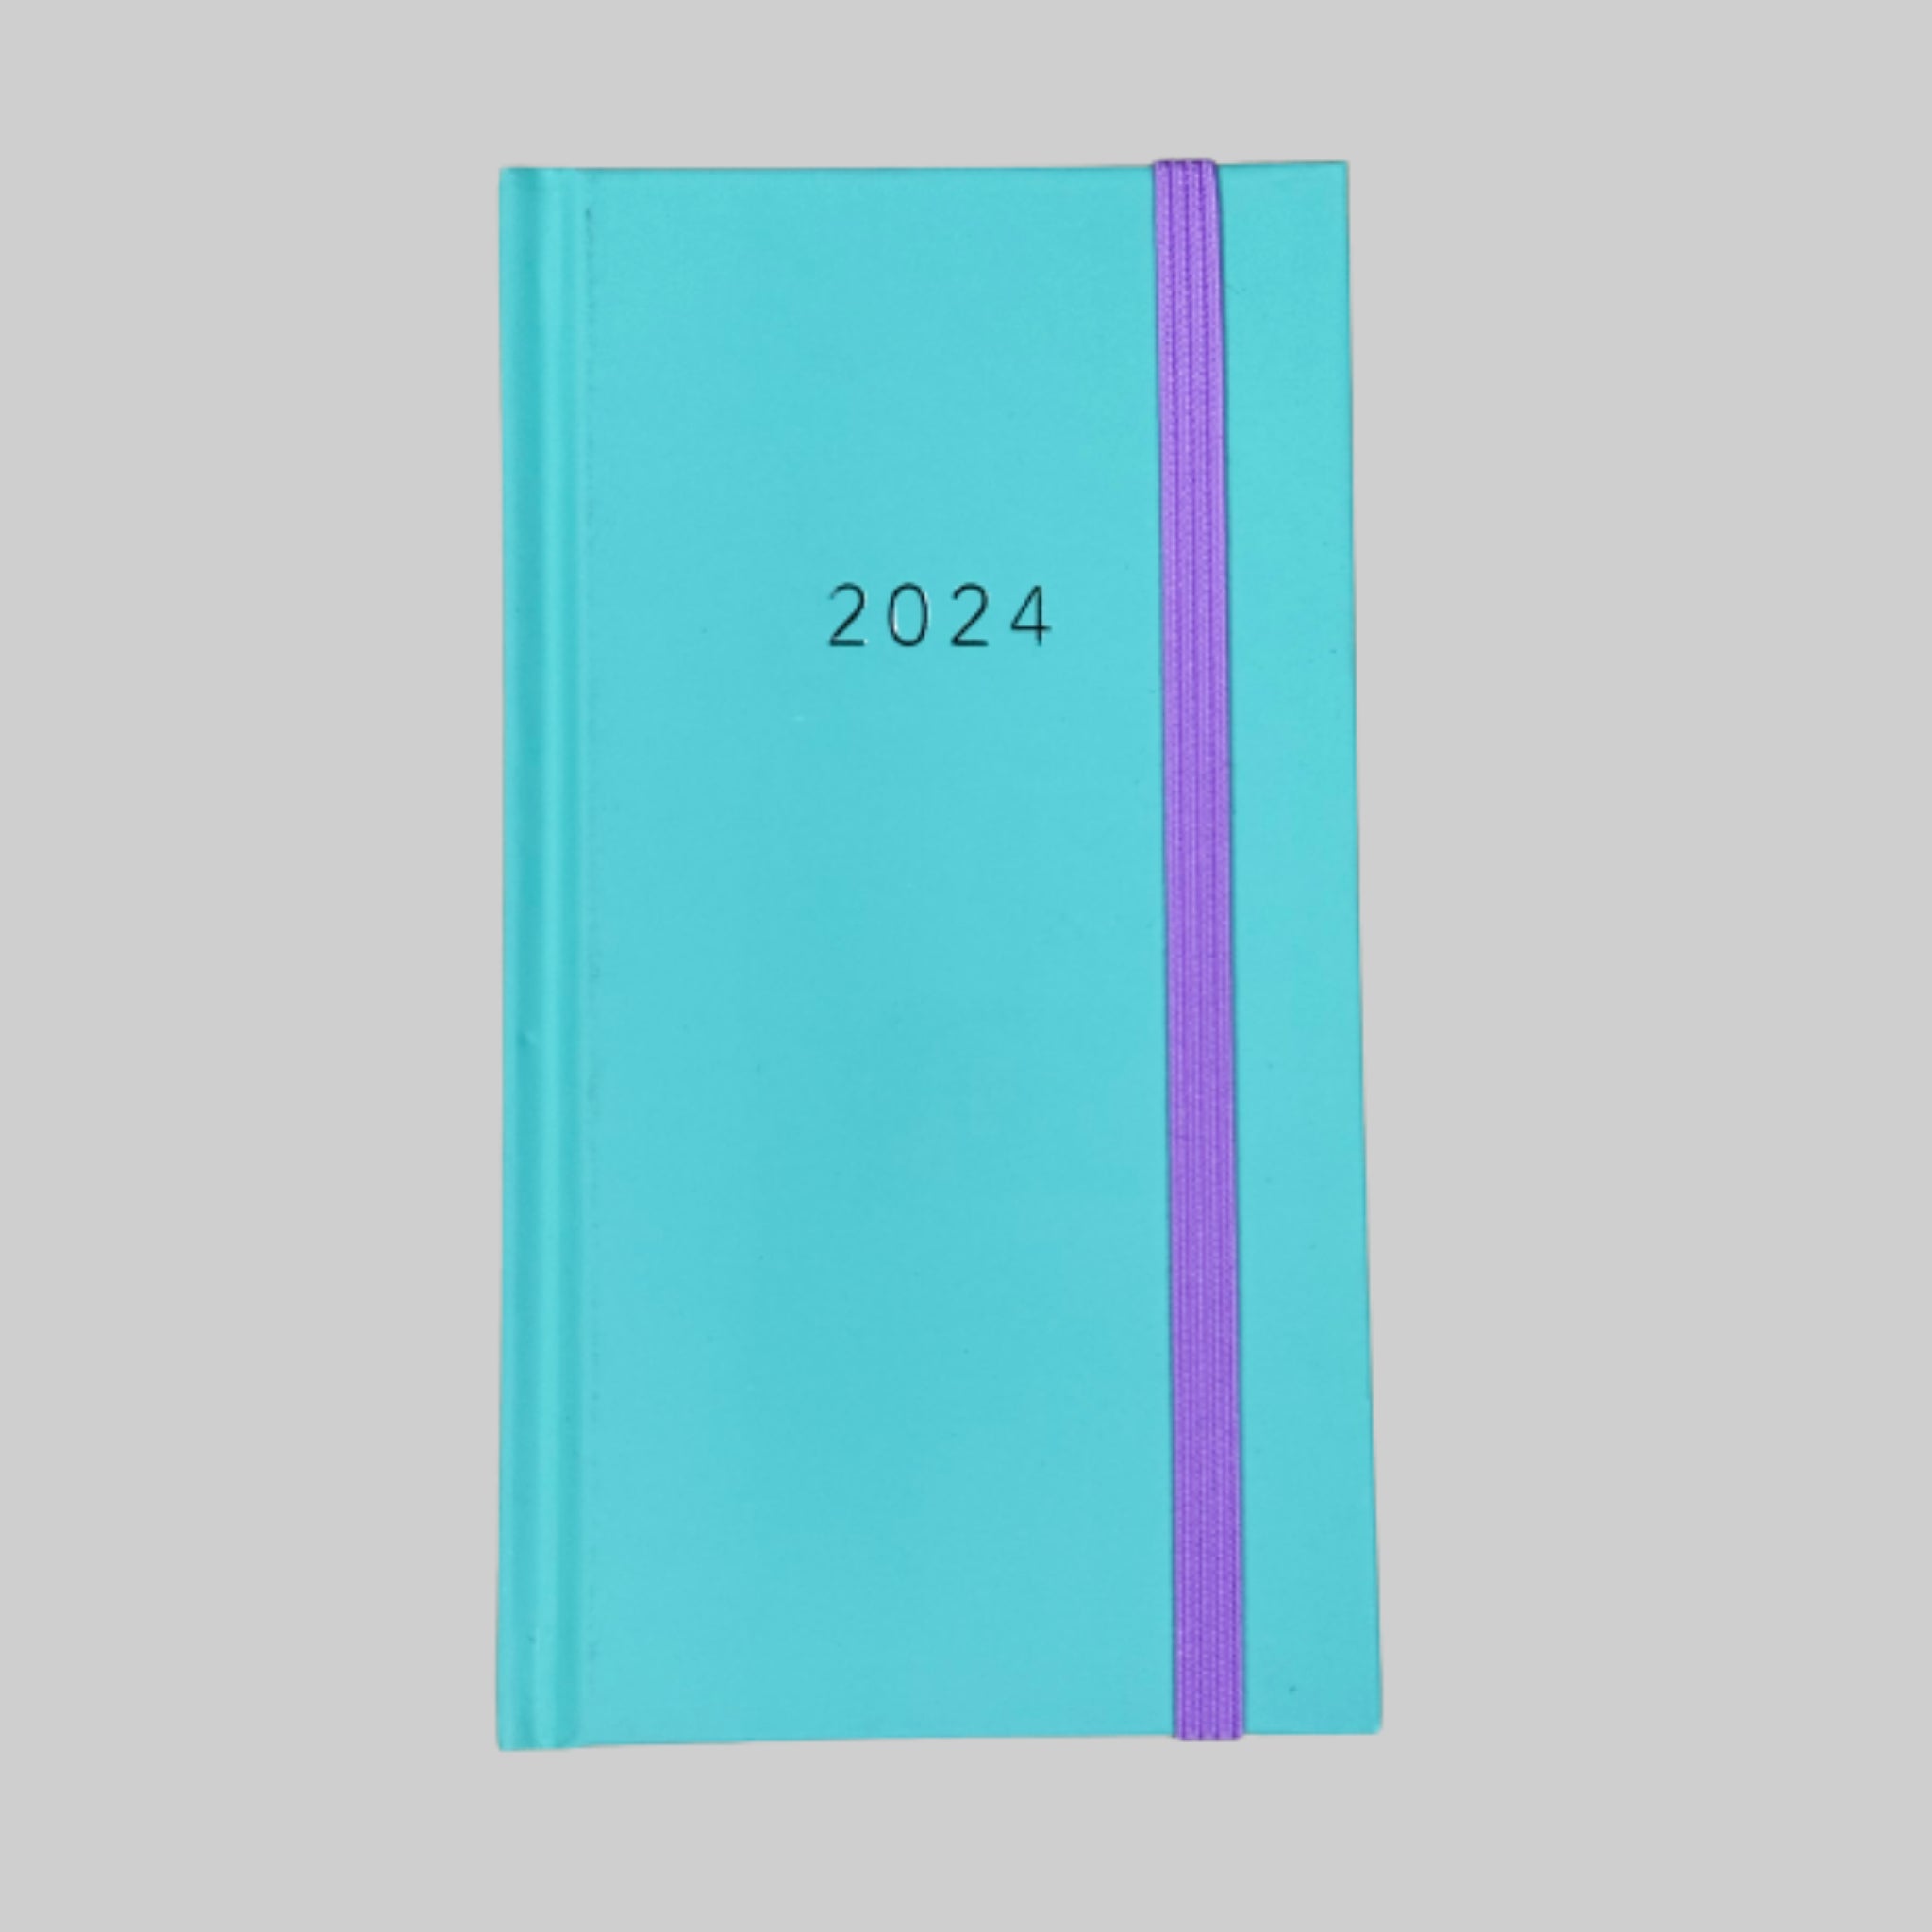 Beclen Harp 2024 Slim Week To View/WTV Full Year Organiser Planner Diary With Elastic Closure And Hard Back Cover